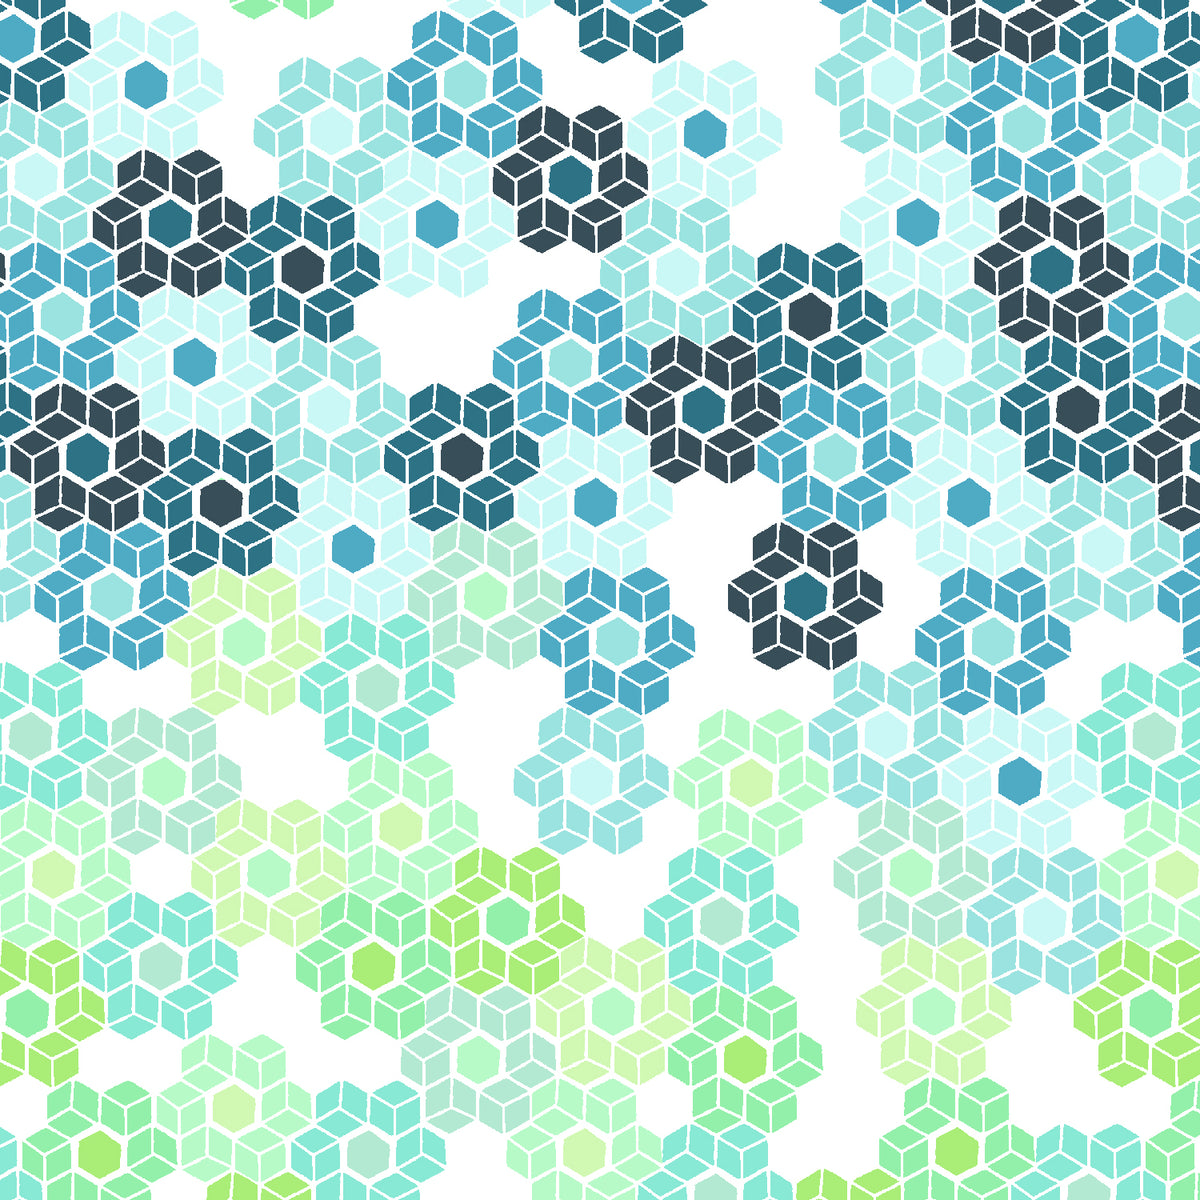 A Day Away Quilt Fabric - Hexie Party in Splash Blue/Green - RF102-SP1